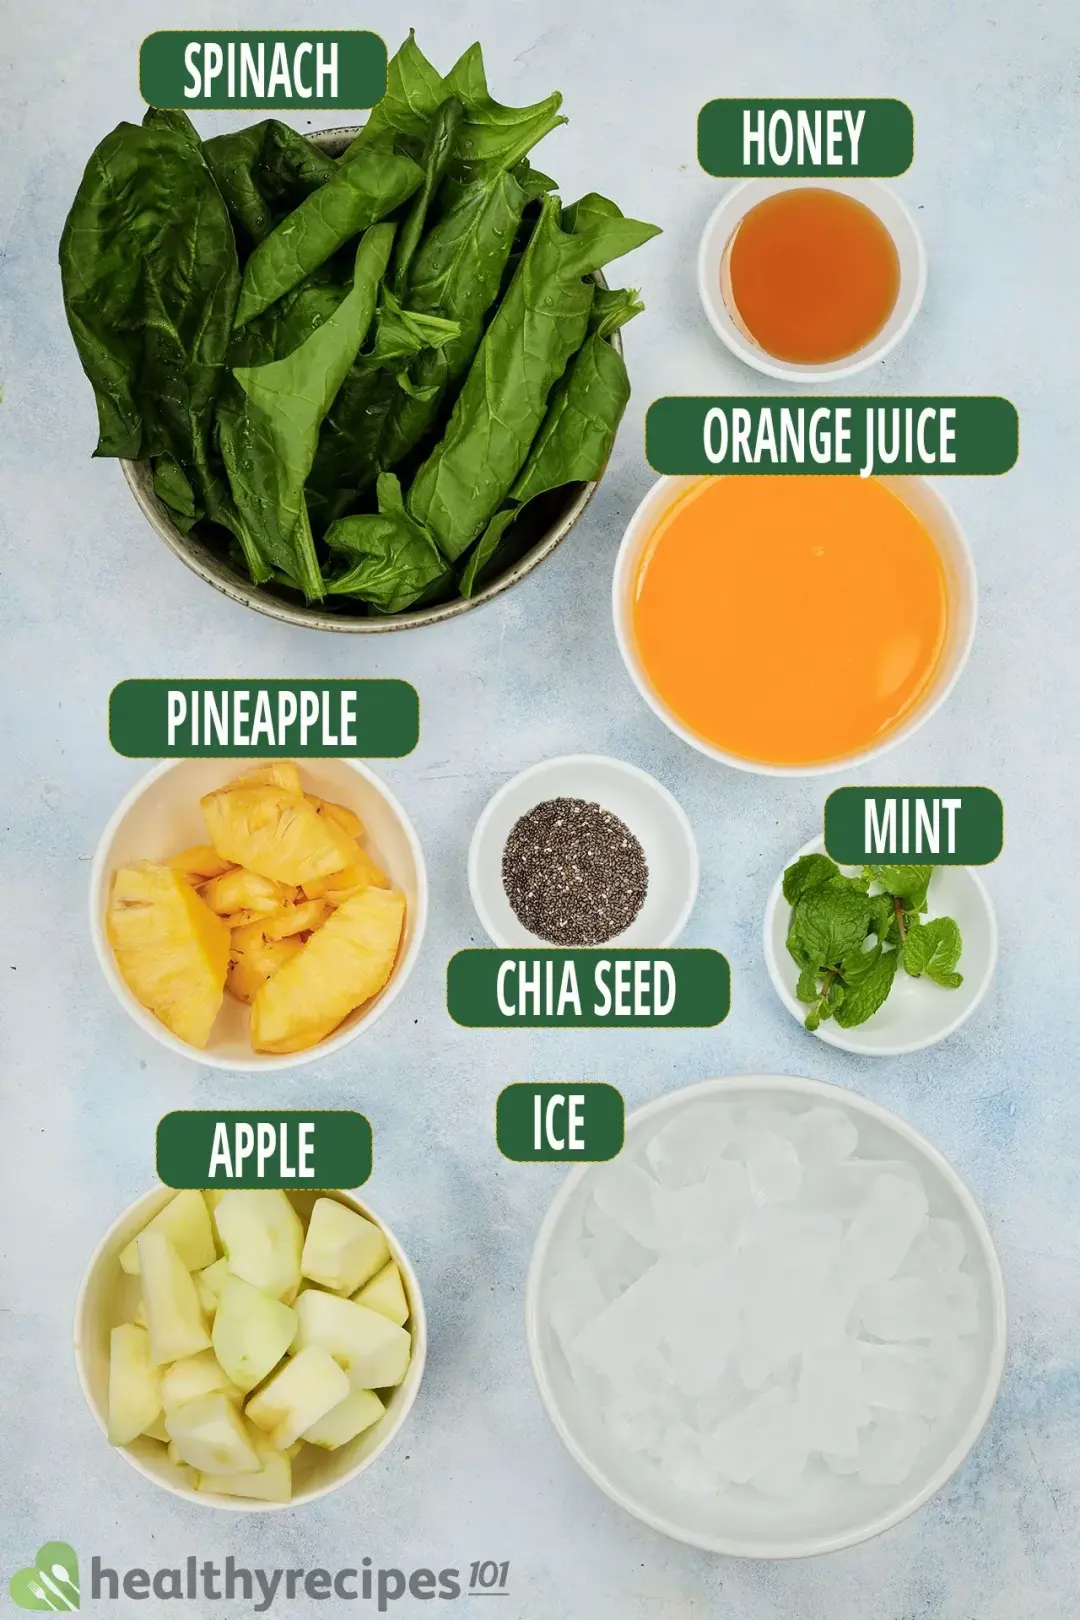 Ingredients needed for making a green apple smoothie, including bowls of apple cubes, pineapple slices, spinach leaves, spearmint leaves, chia seed, orange juice, and ice